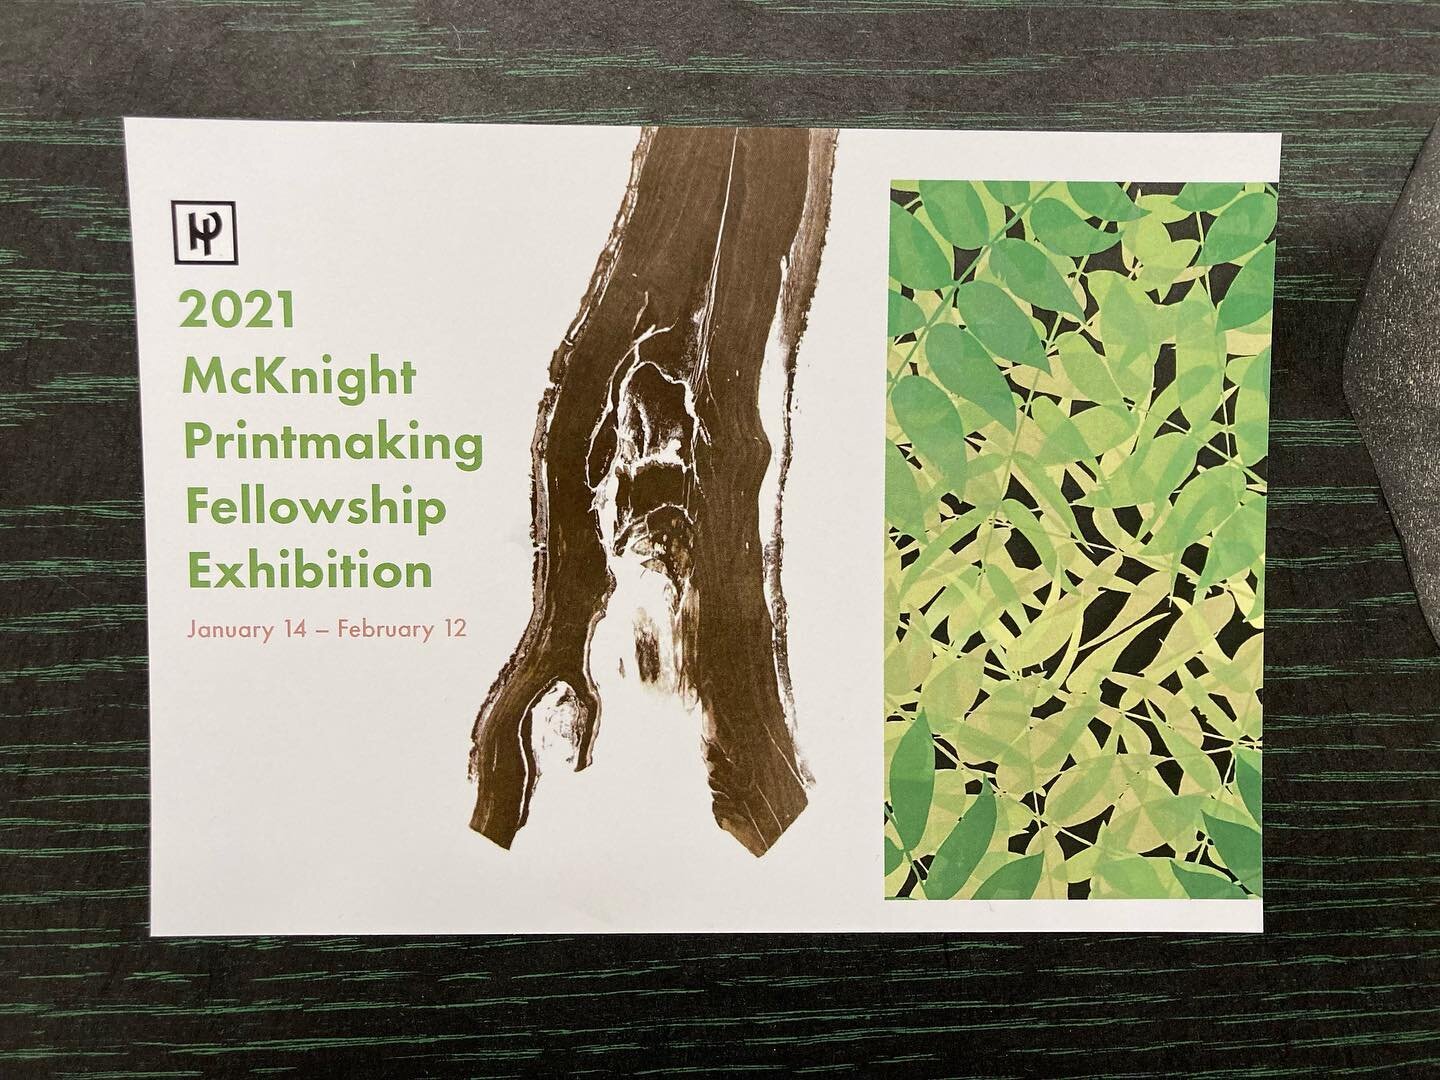 McKnight Fellowship in Printmaking opens this Friday night 6:30-9pm.  Hope to see you there!

#mcknightfellowship #printmaking